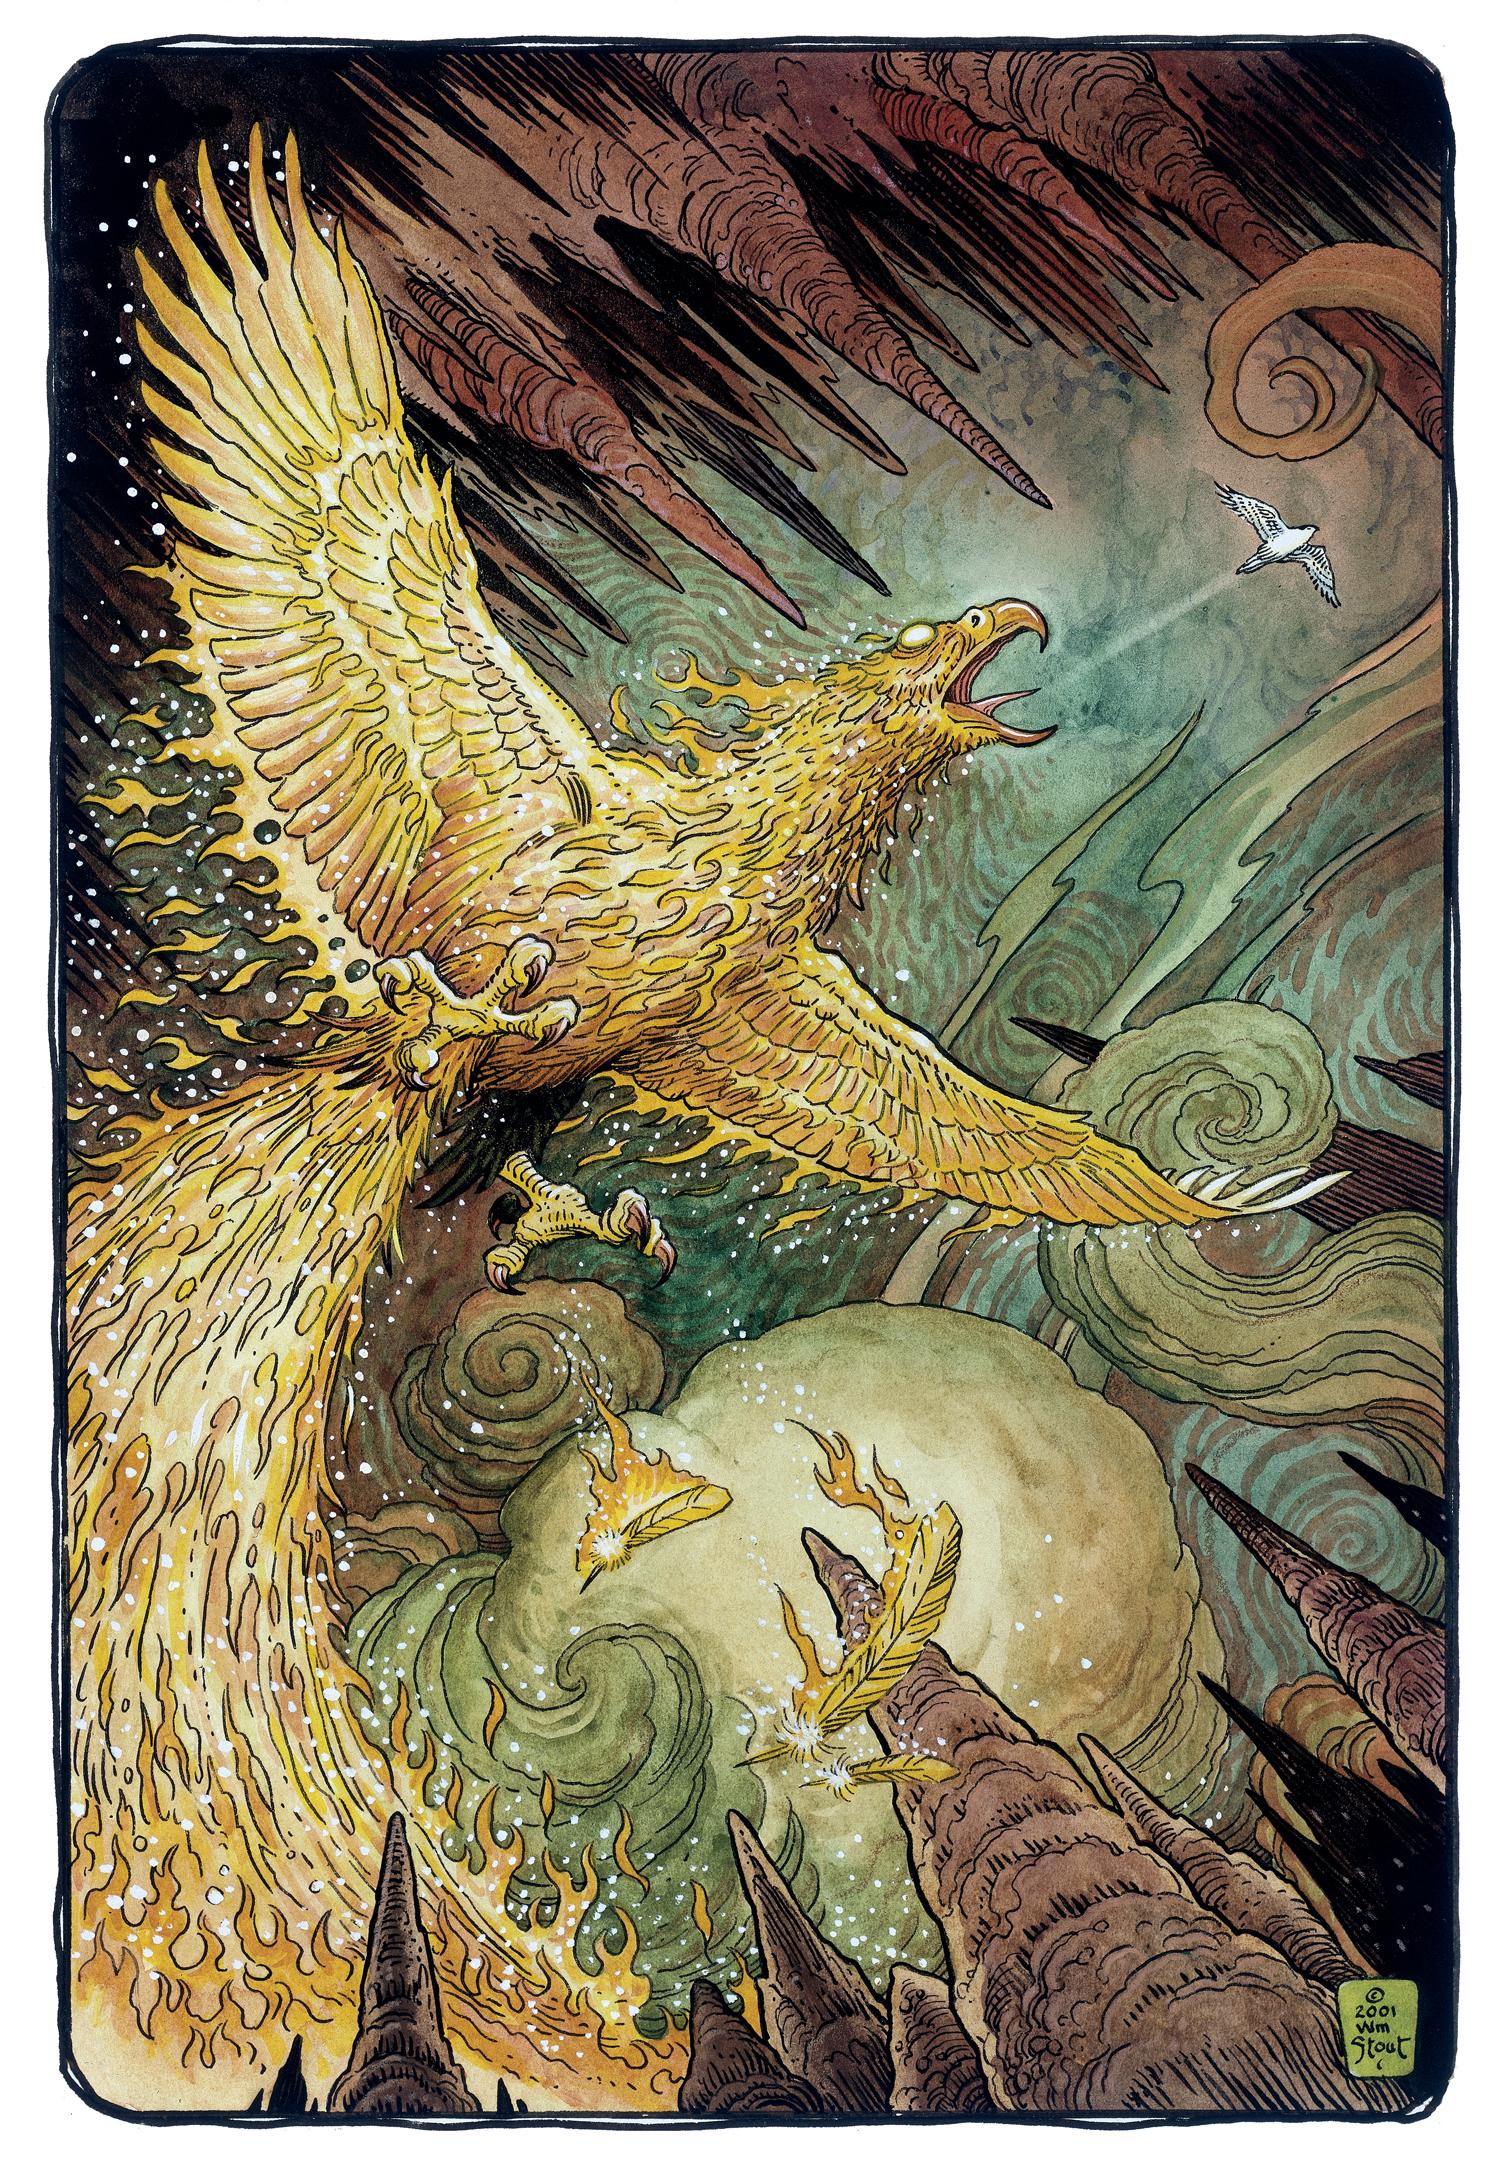 The Flame Bird - Art by William Stout